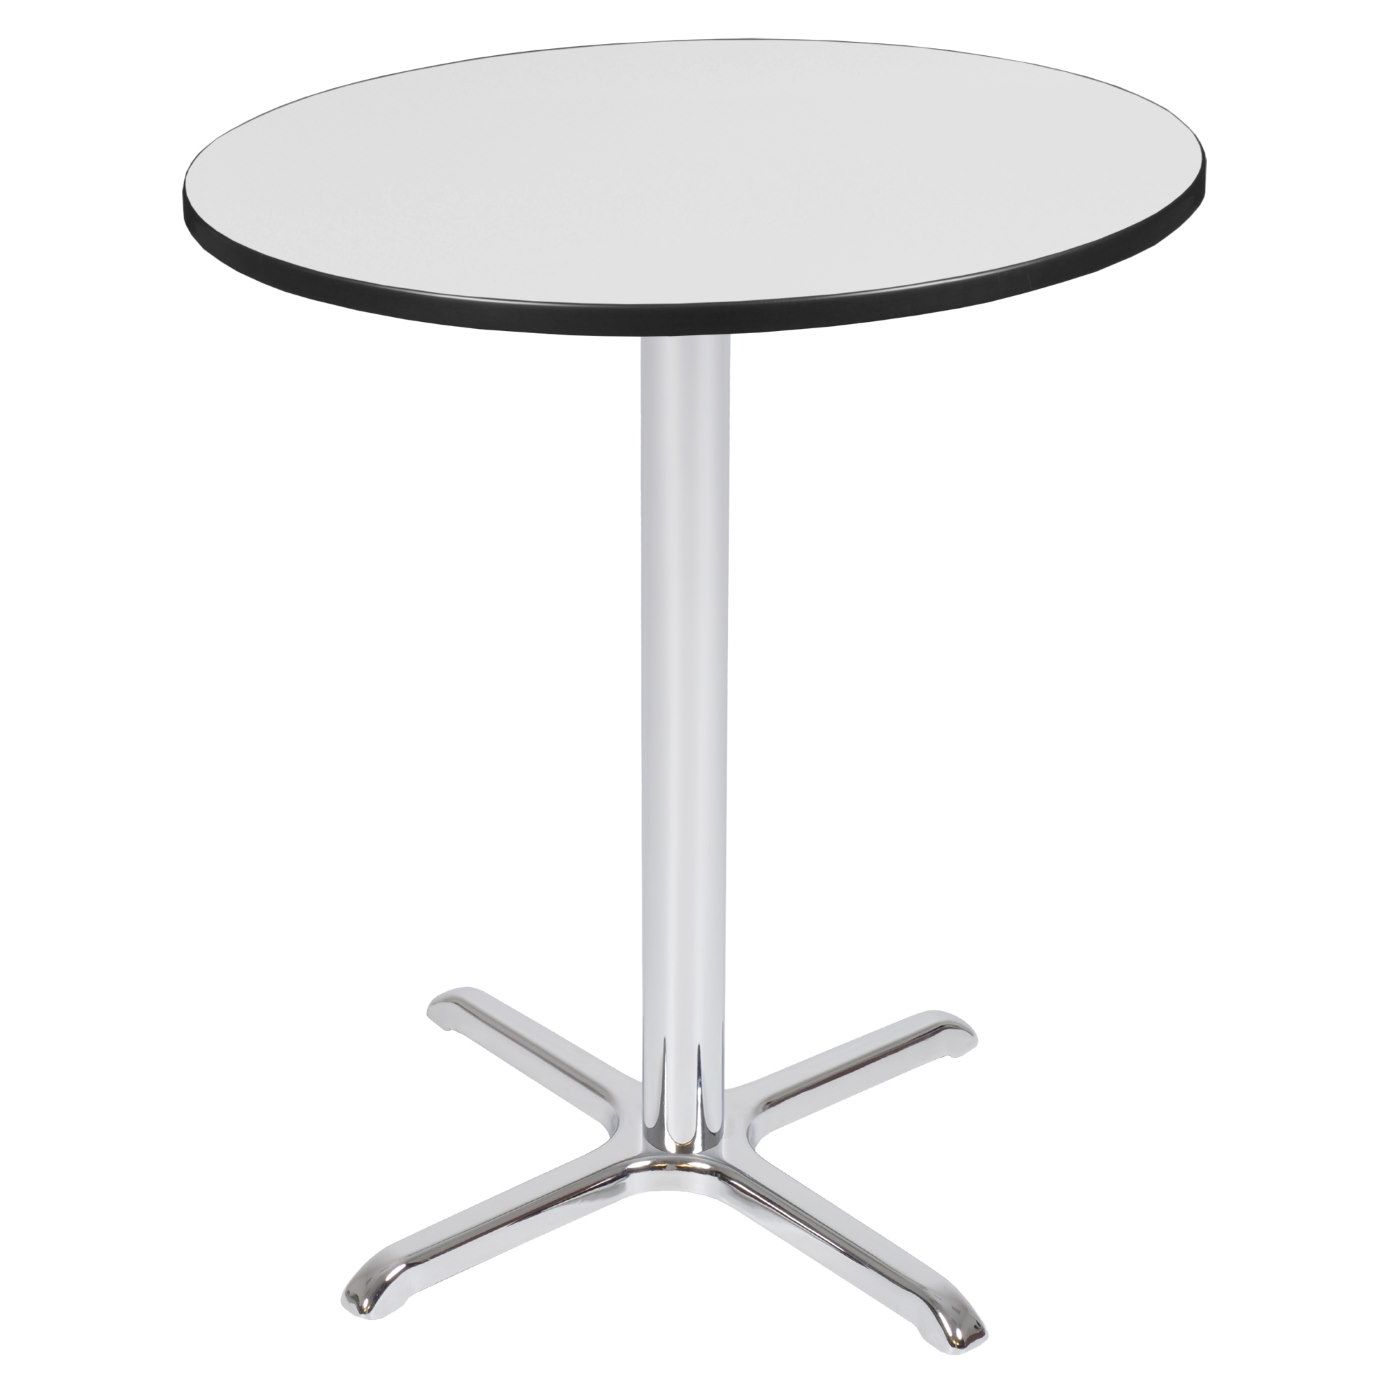 Tcb36rndwhcm | Regency Cain Cafe High 36" Round X Base Table  White Throughout Regency Cain Steel Coffee Tables (Gallery 3 of 20)